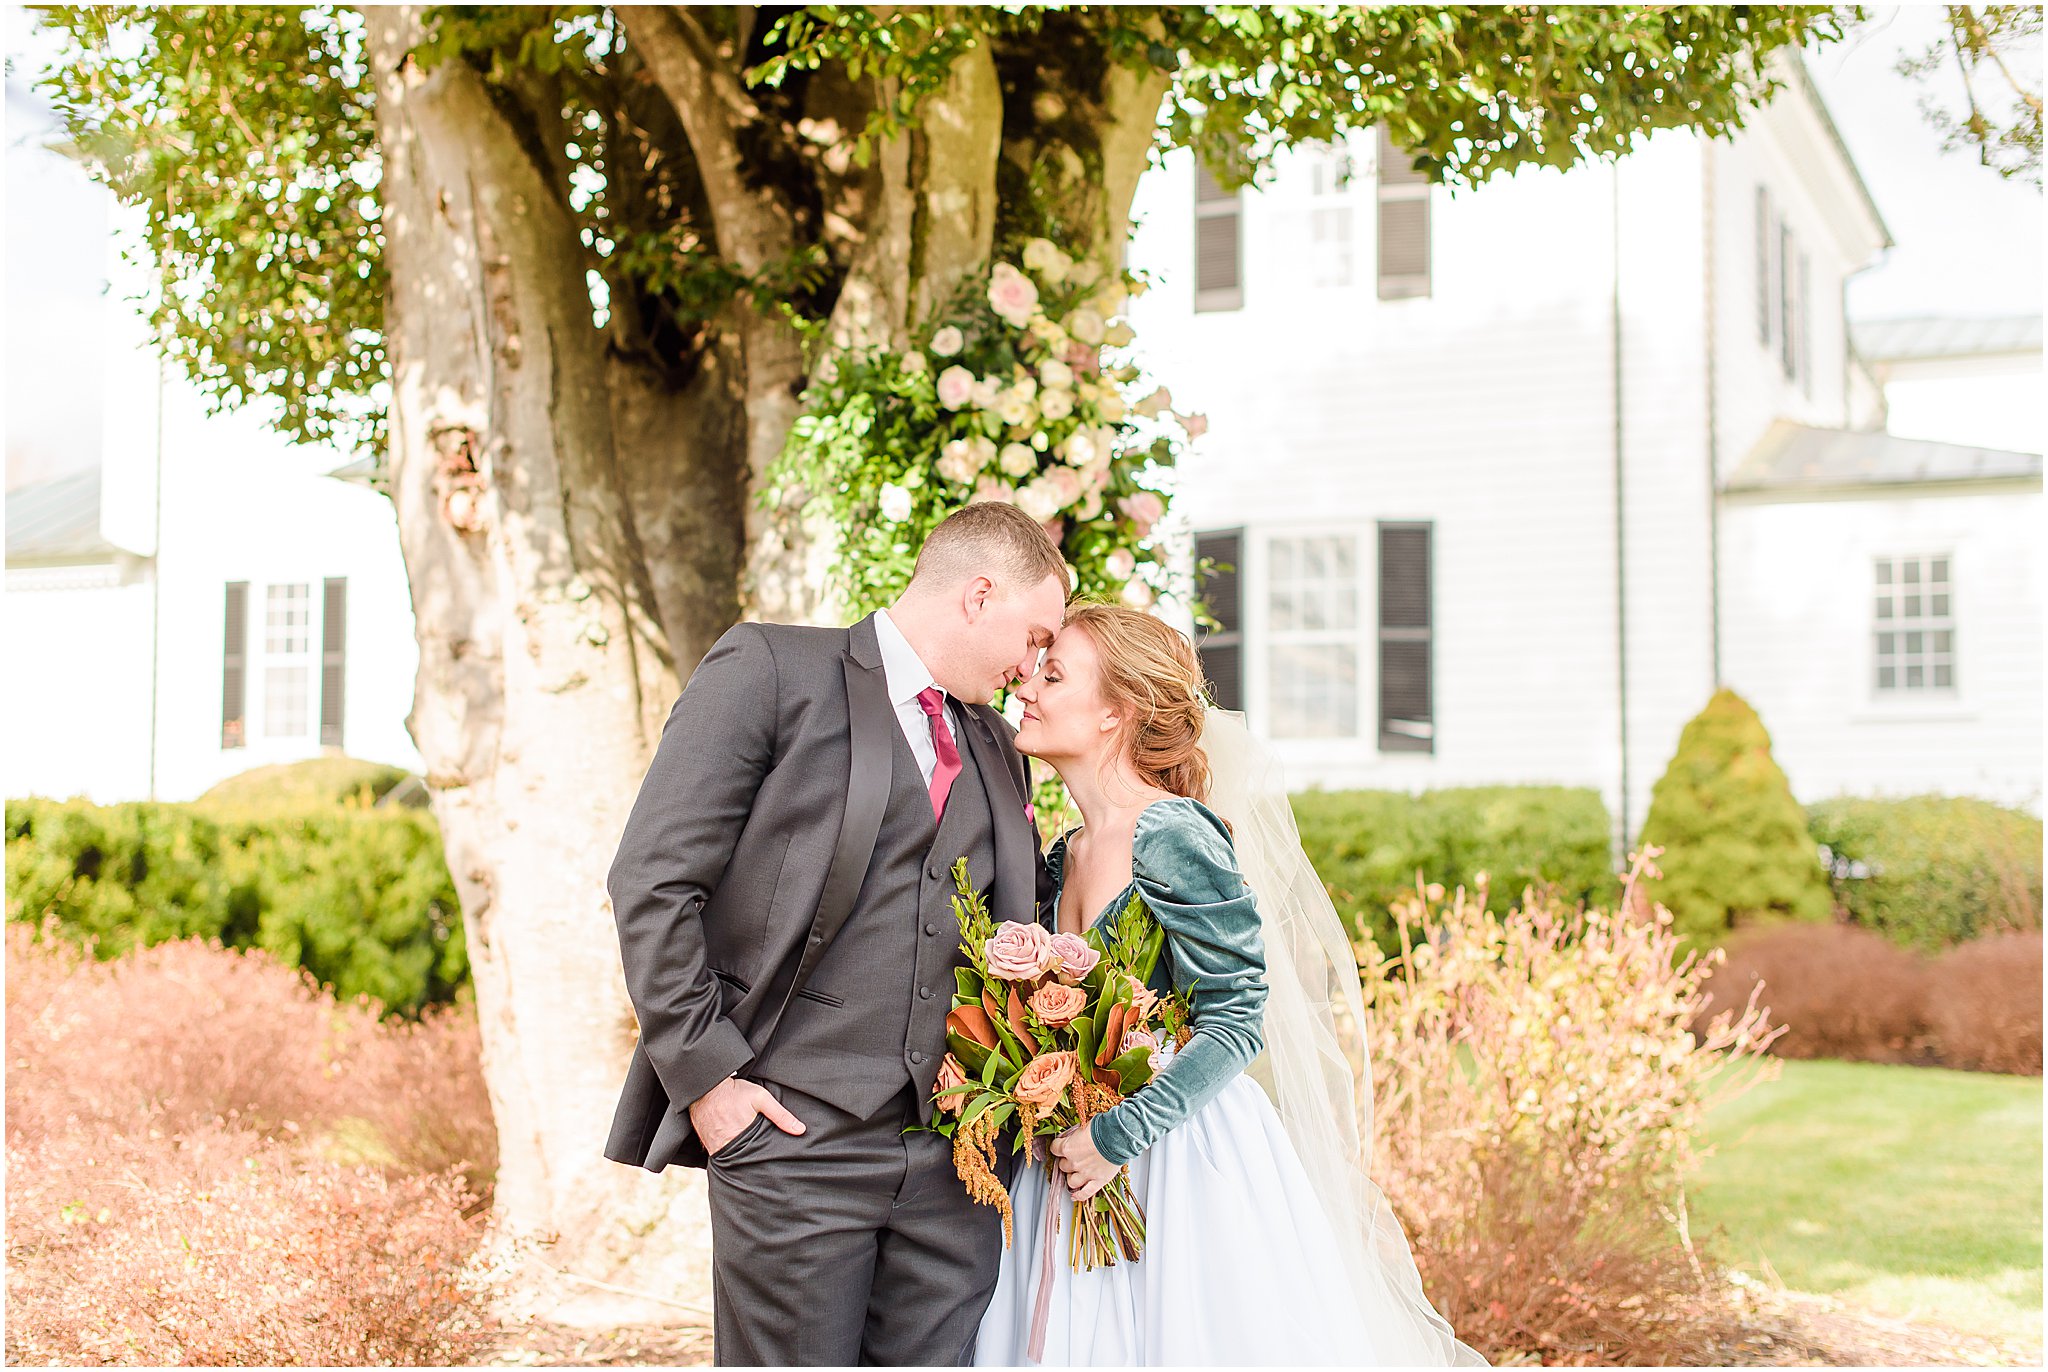 Bride and groom nose to nose in front of a floral display at ceremony site Mount Ida Farm wedding